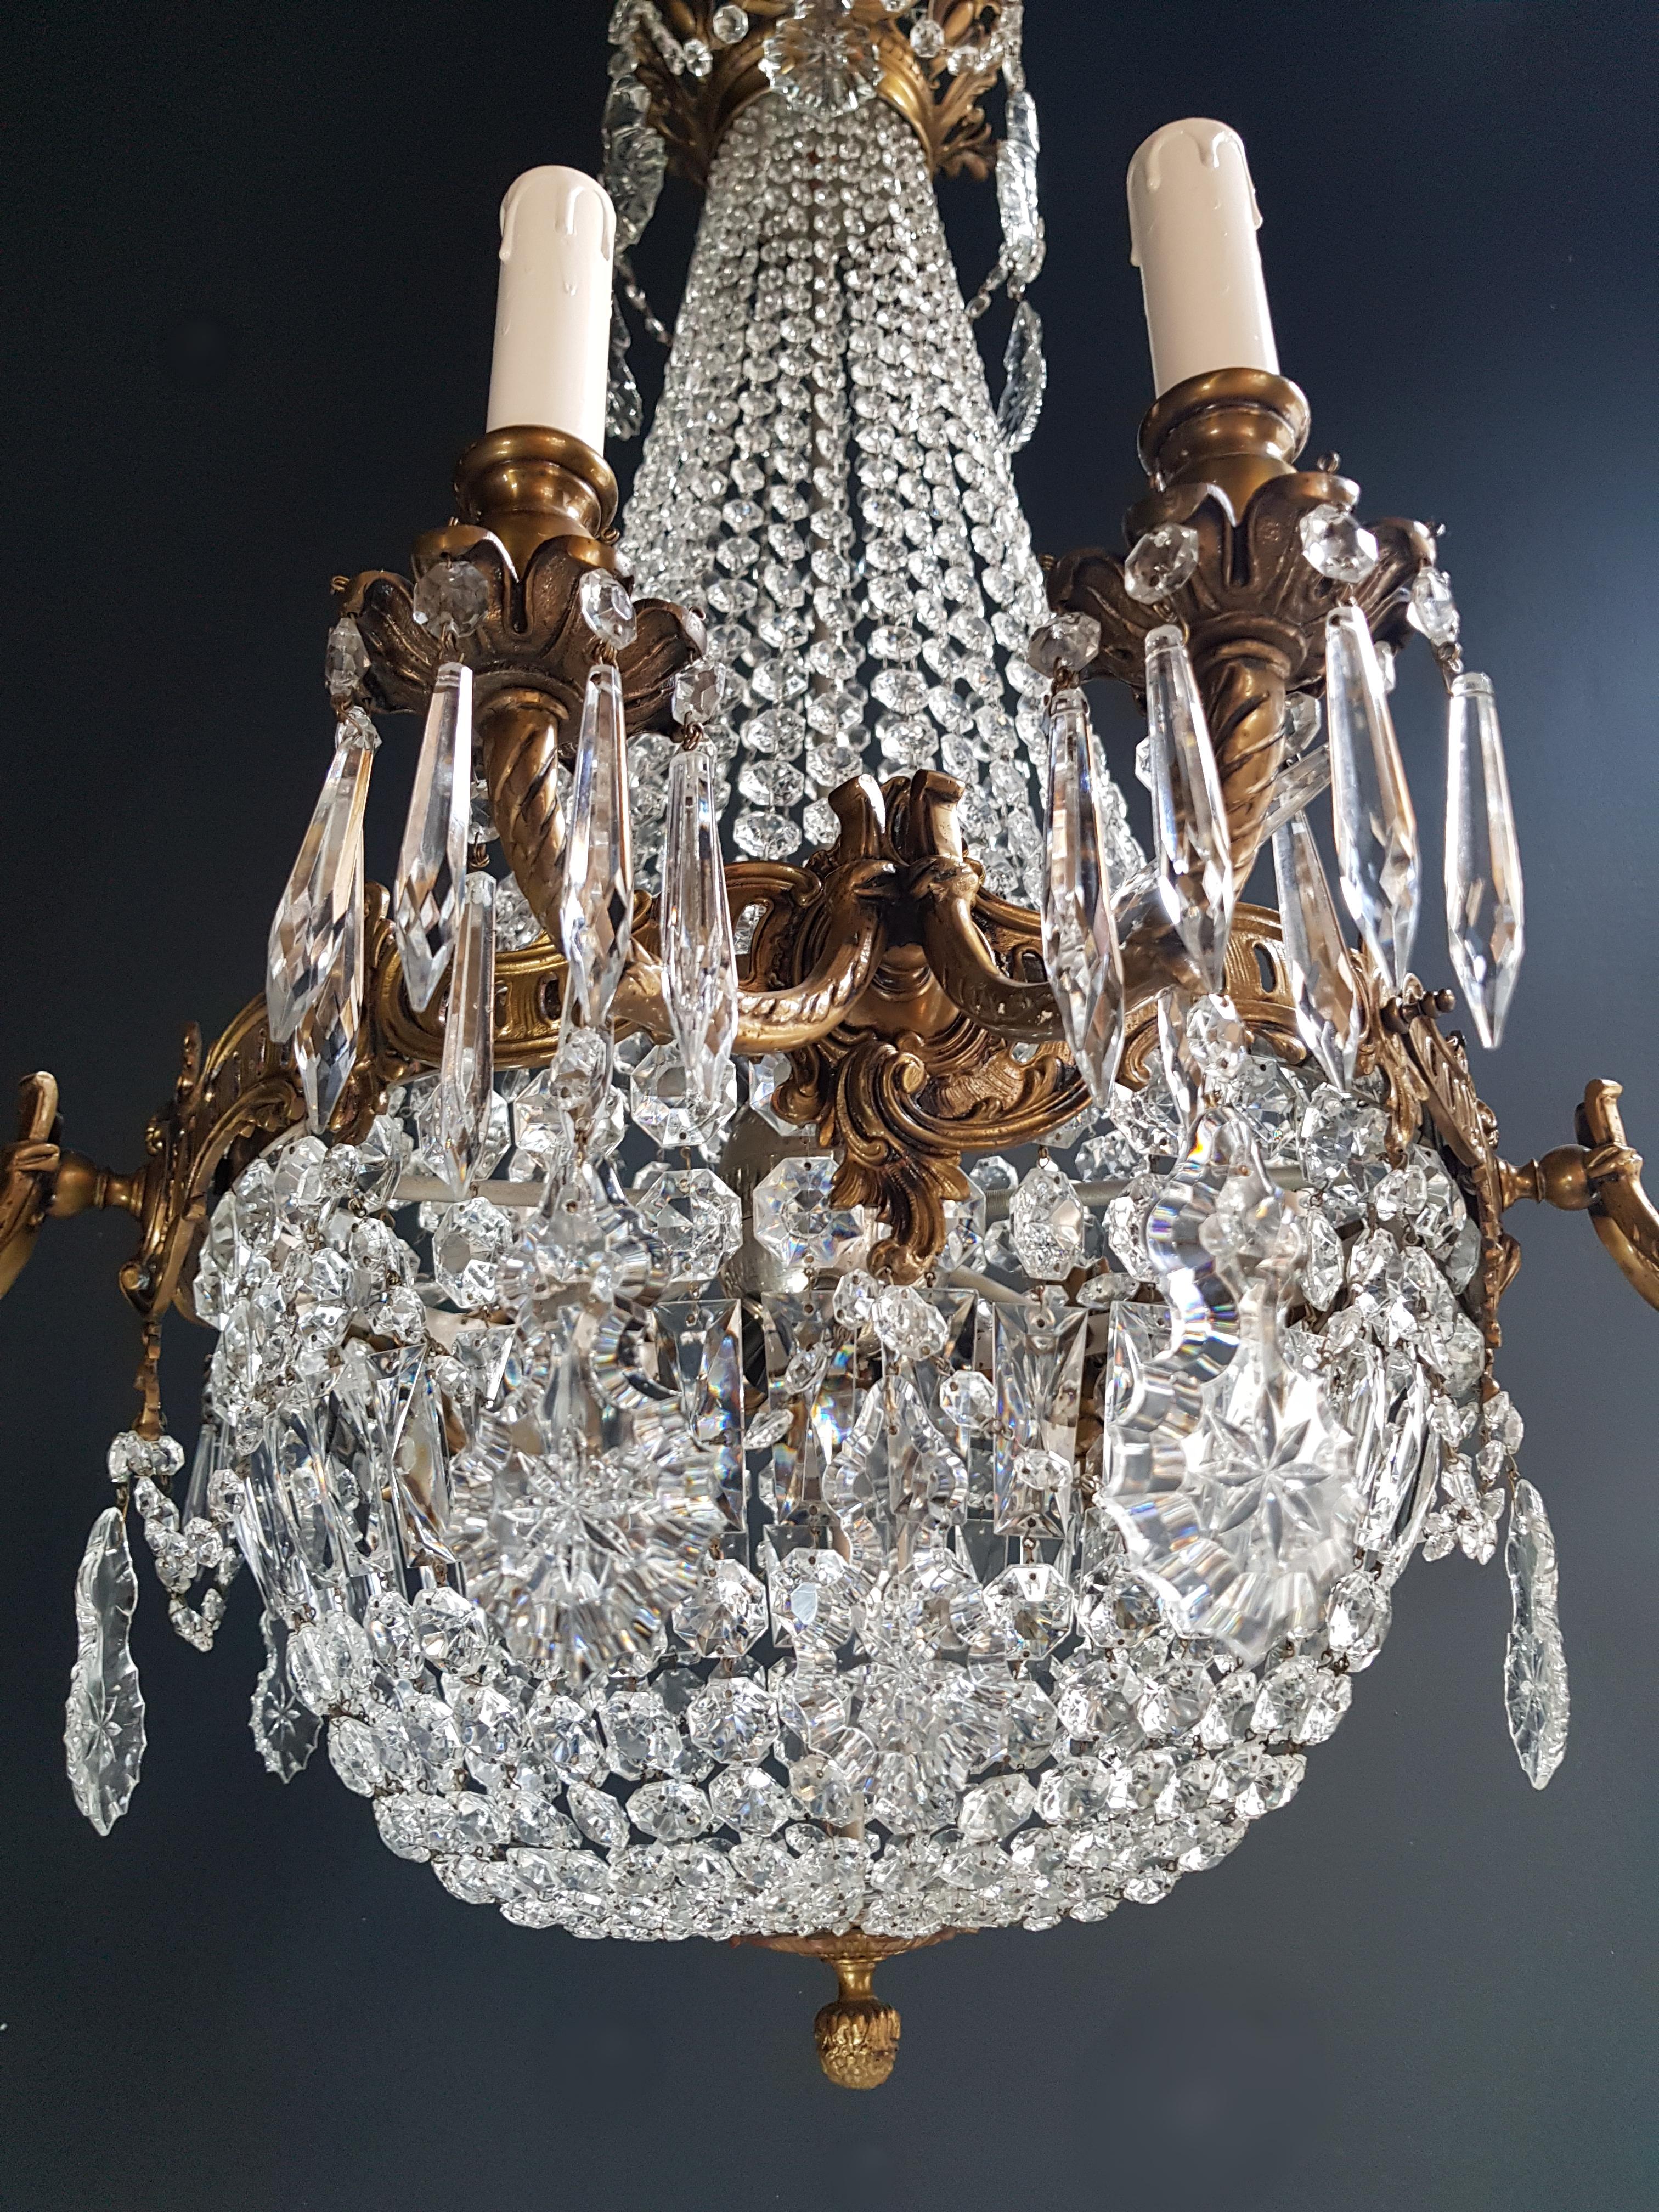 Cabling and sockets completely renewed. Crystal hand knotted
Measures: Total height 130 cm, height without chain: 100 cm, diameter 85 cm, weight (approximately) 20 kg.

Number of lights: 20-light bulb sockets: E14

Montgolfiè Empire Sac a Pearl